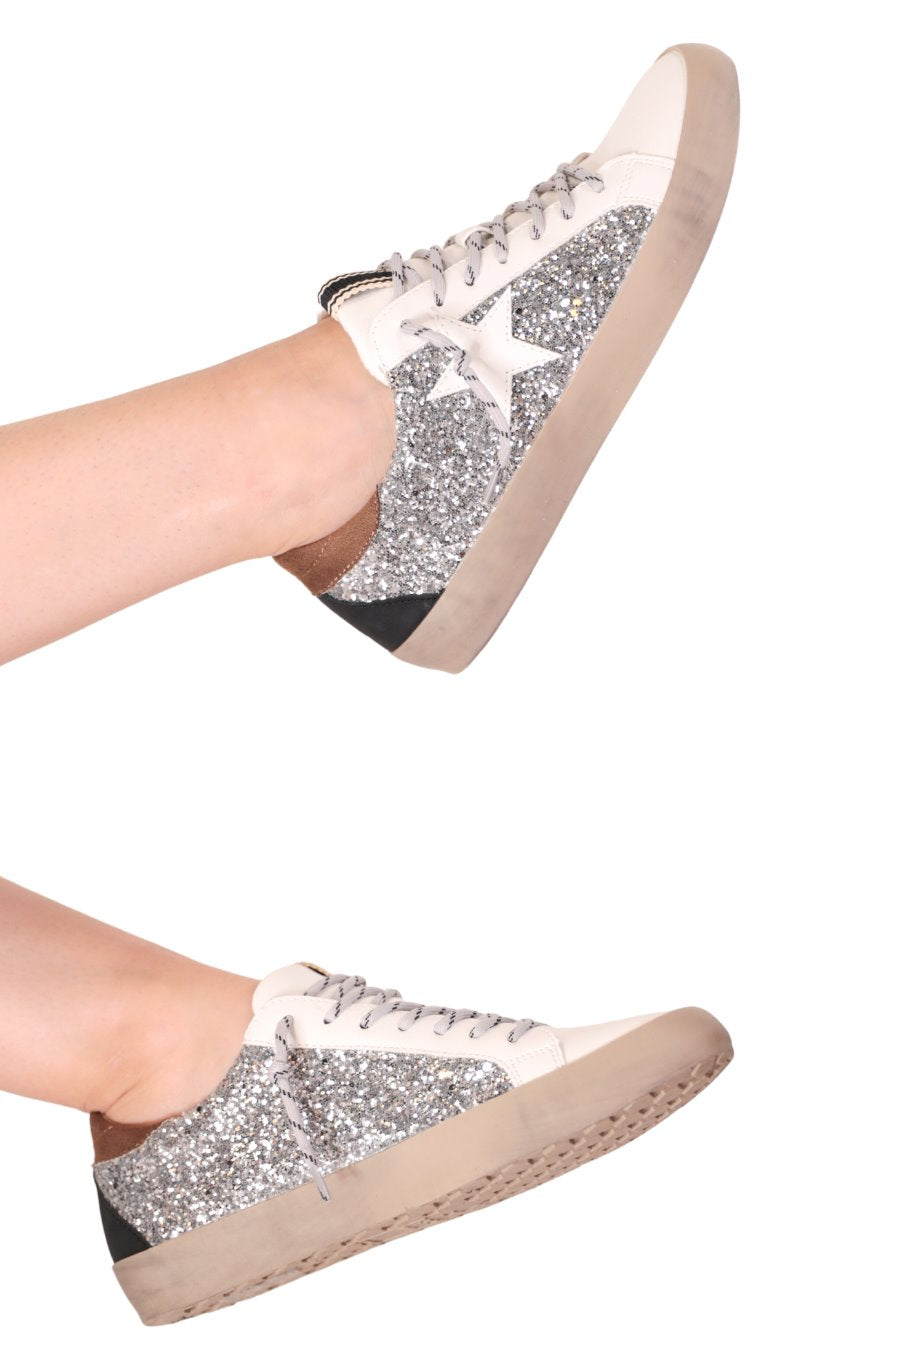 All About the *Glitter* Sneakers — Carrie's Chronicles